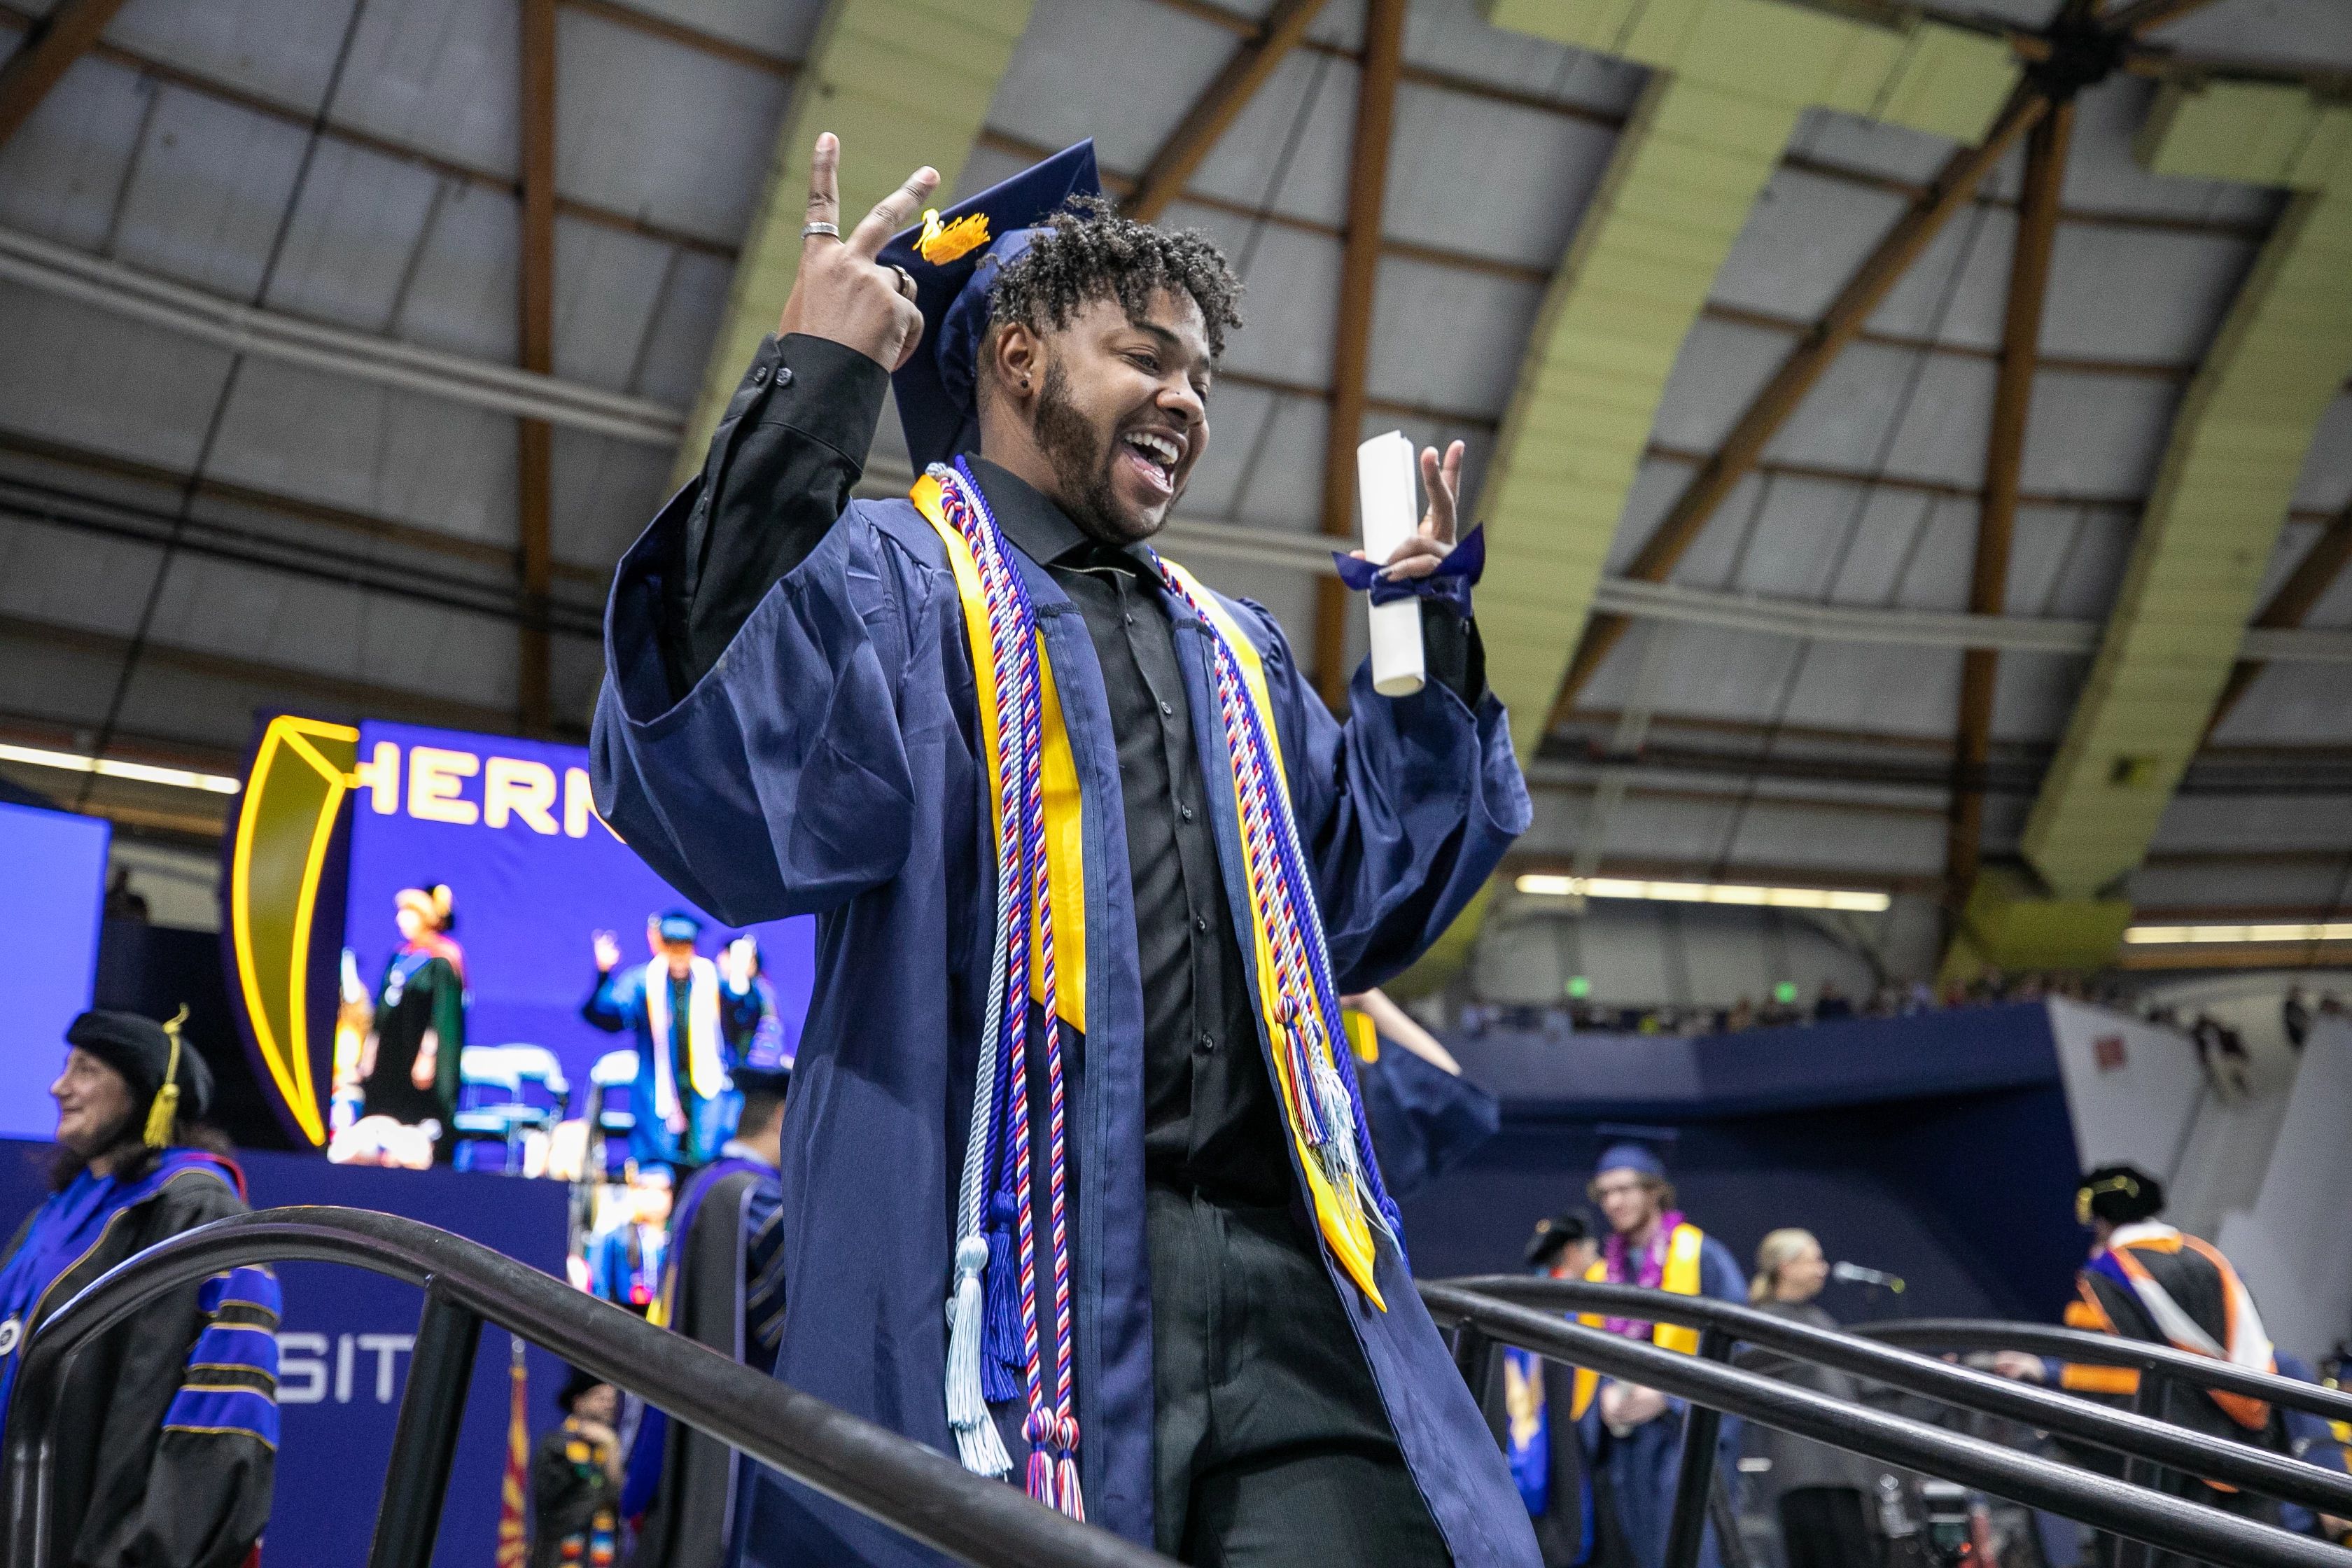 African American NAU student leaving the stage with his diploma in hand, giving a peace sign with his fingers